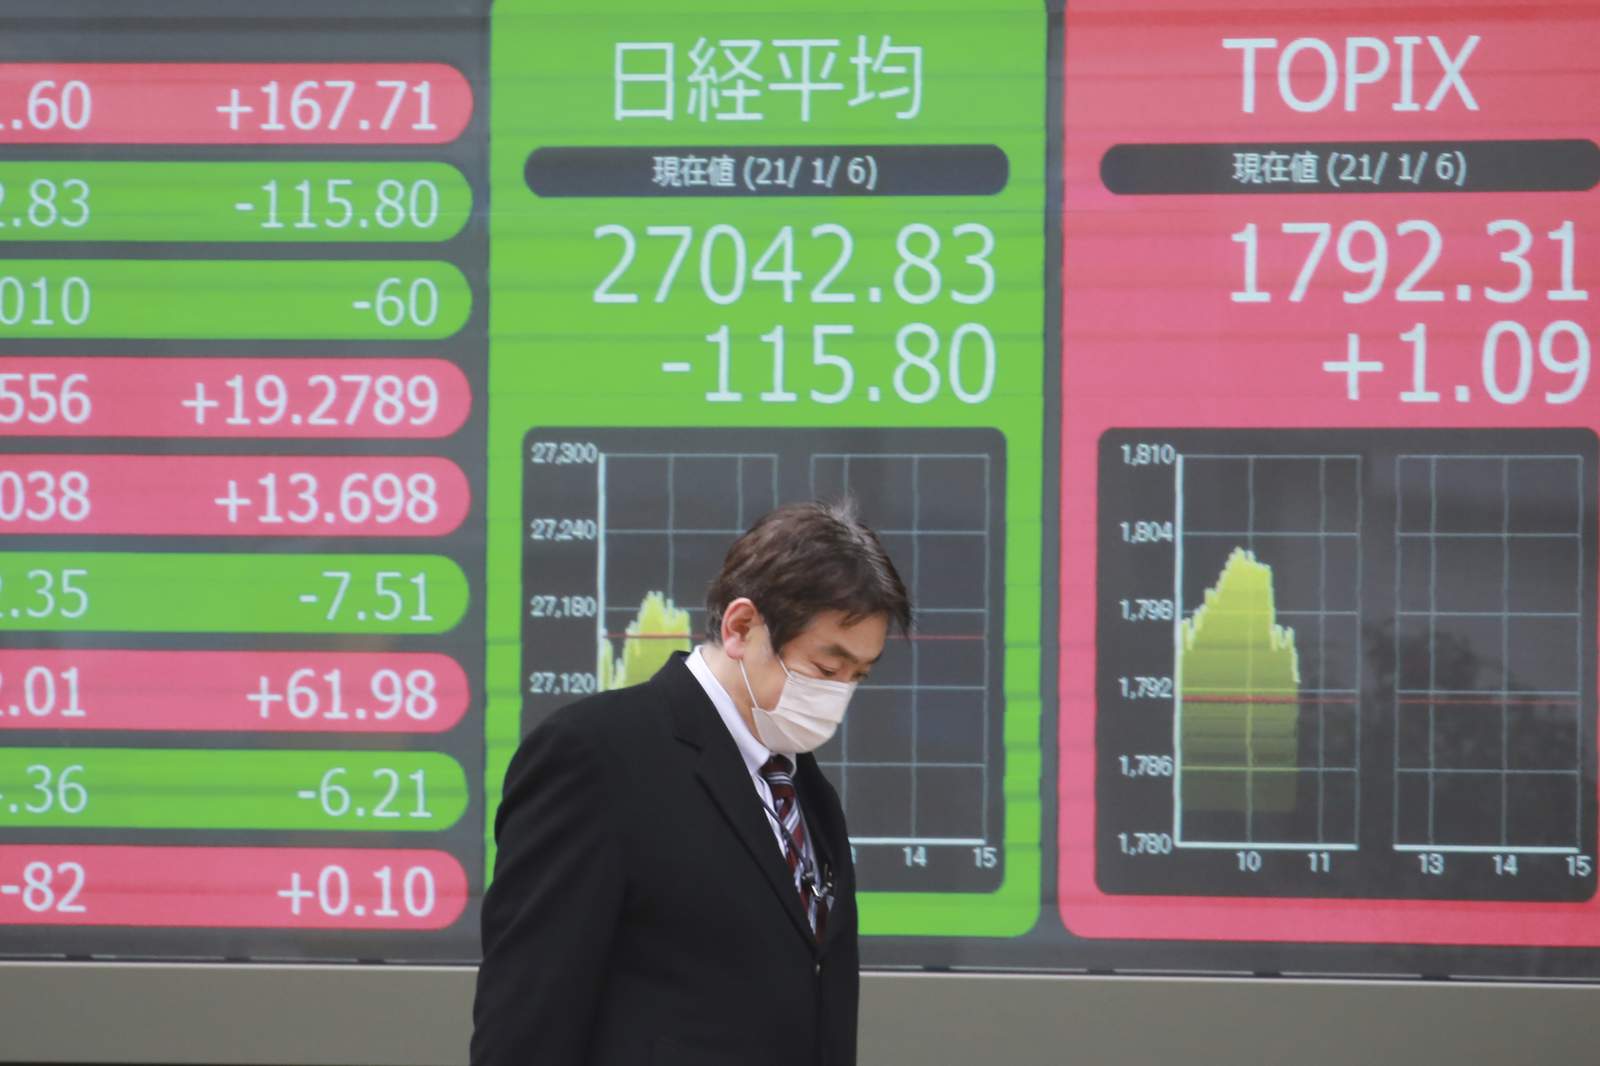 Asian shares mostly lower as virus, China-US tensions weigh